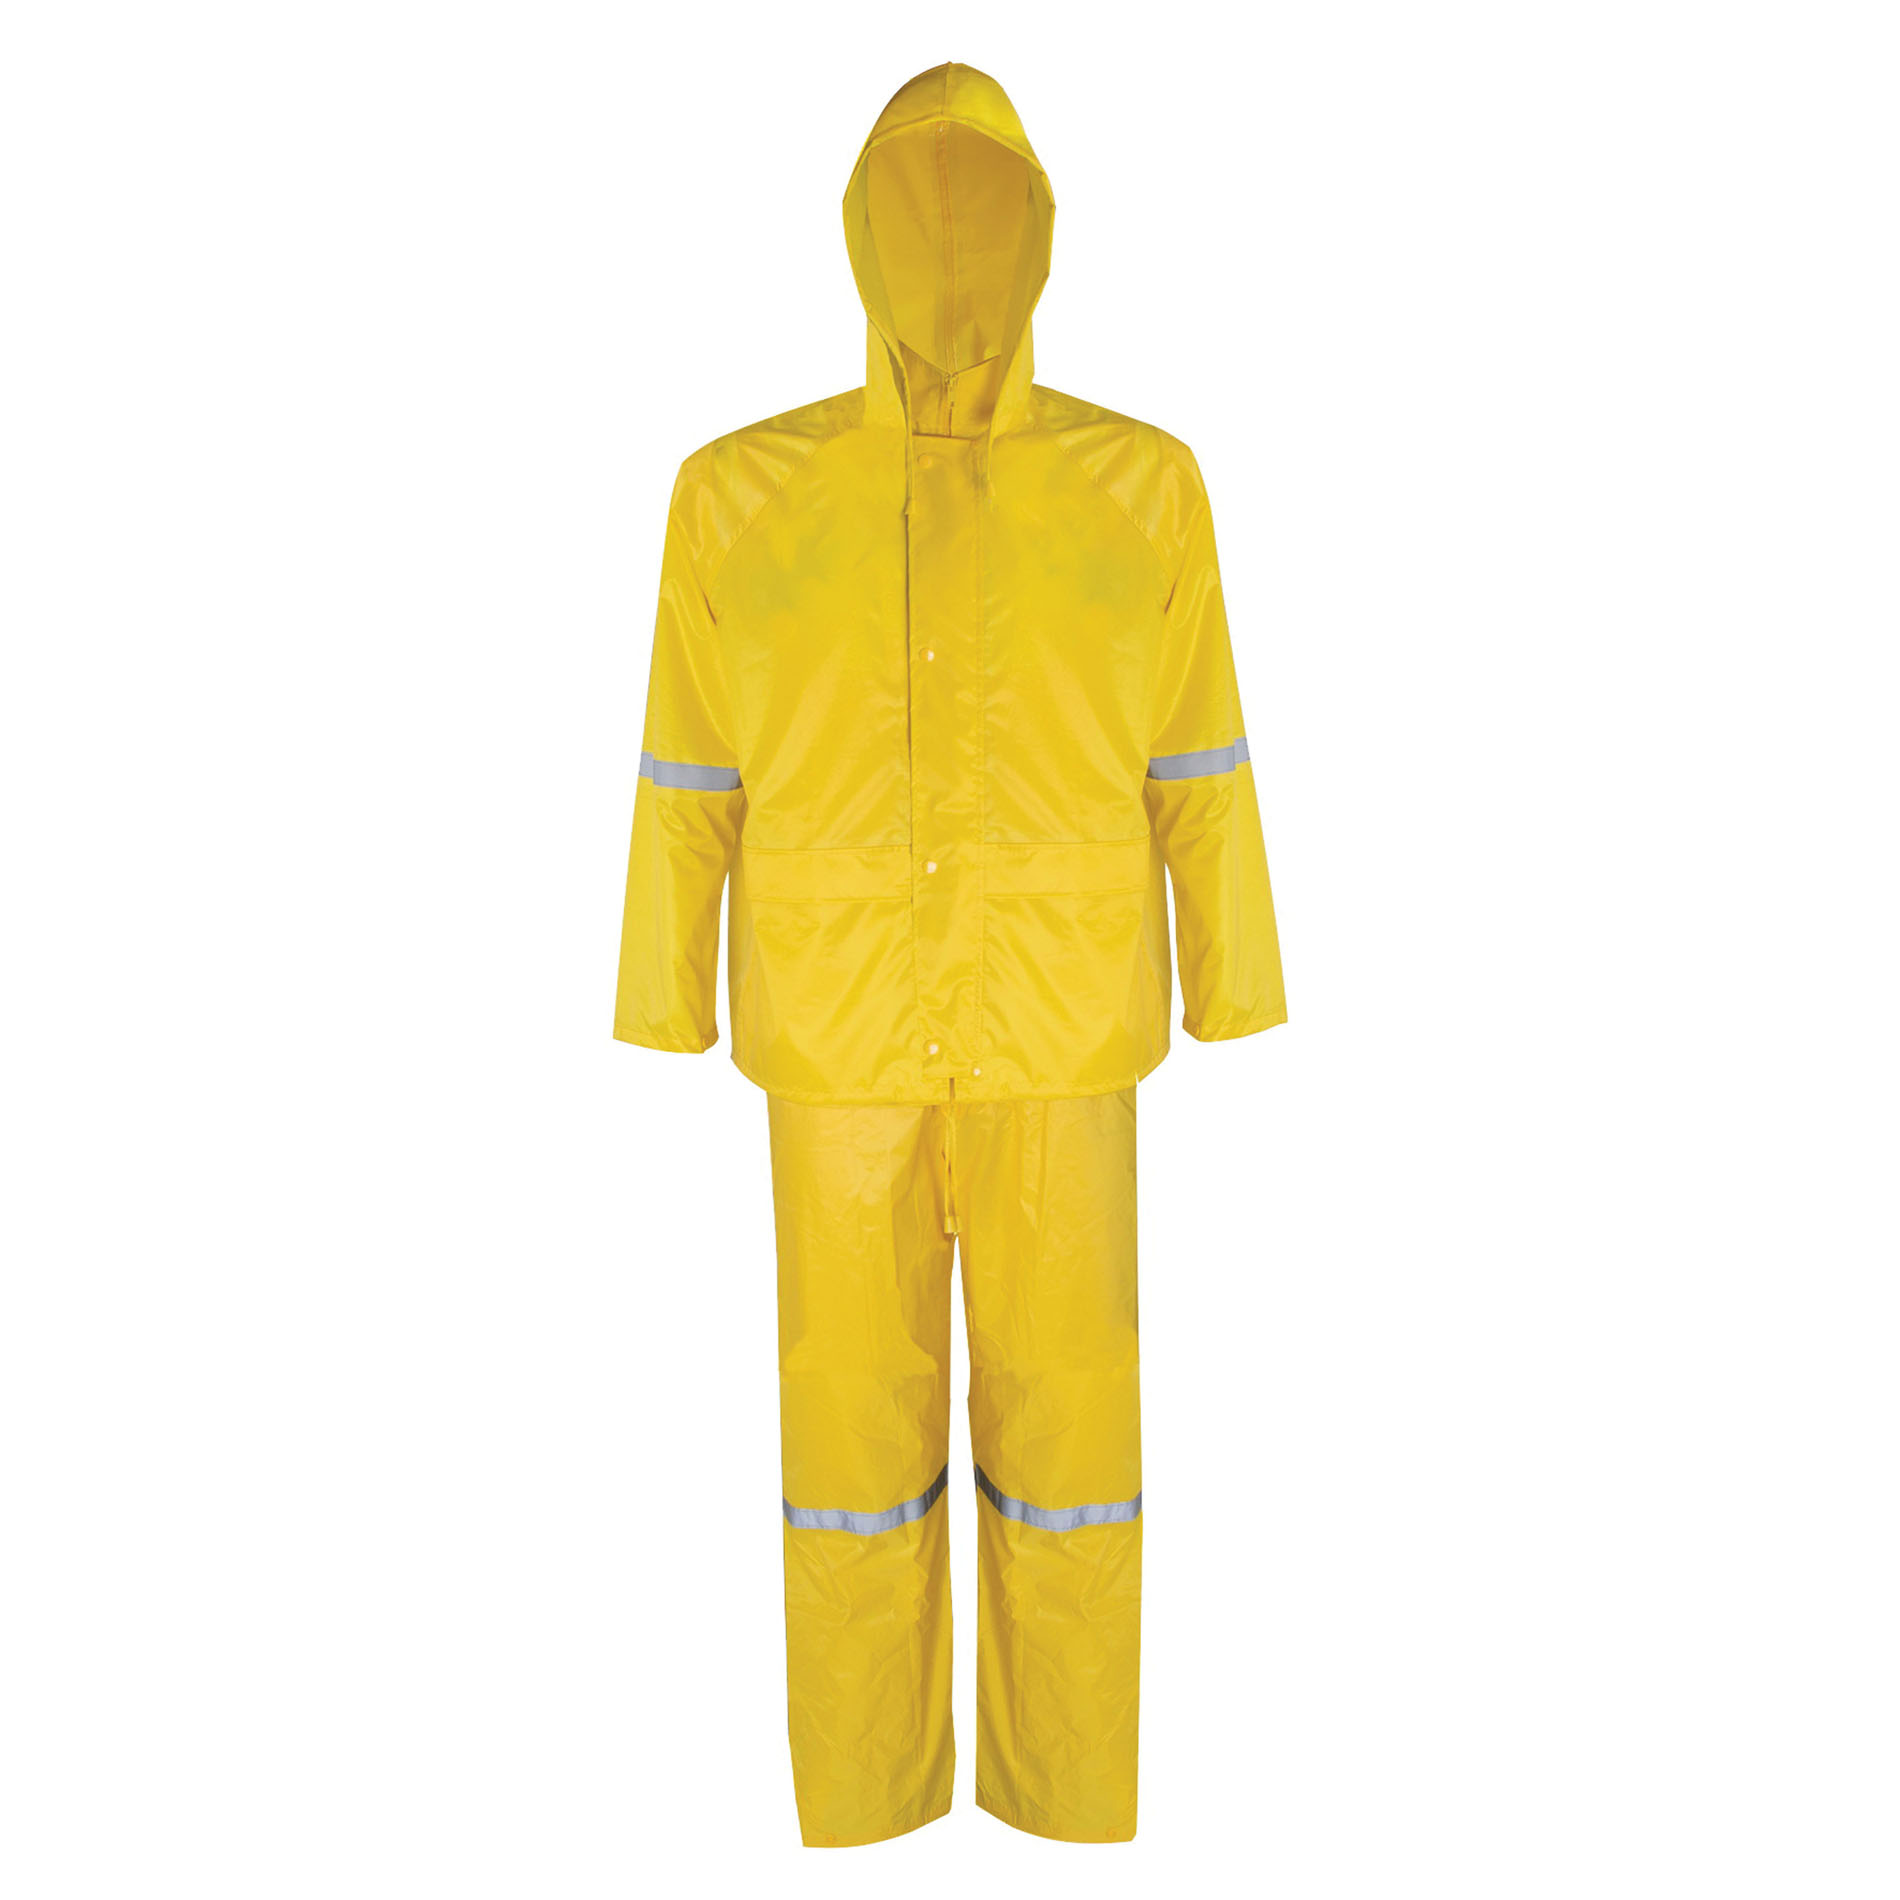 RS3-01-XL Rain Suit, XL, 43 in Inseam, Polyester, Yellow, Concealed Collar, Zipper with Storm Flap Closure